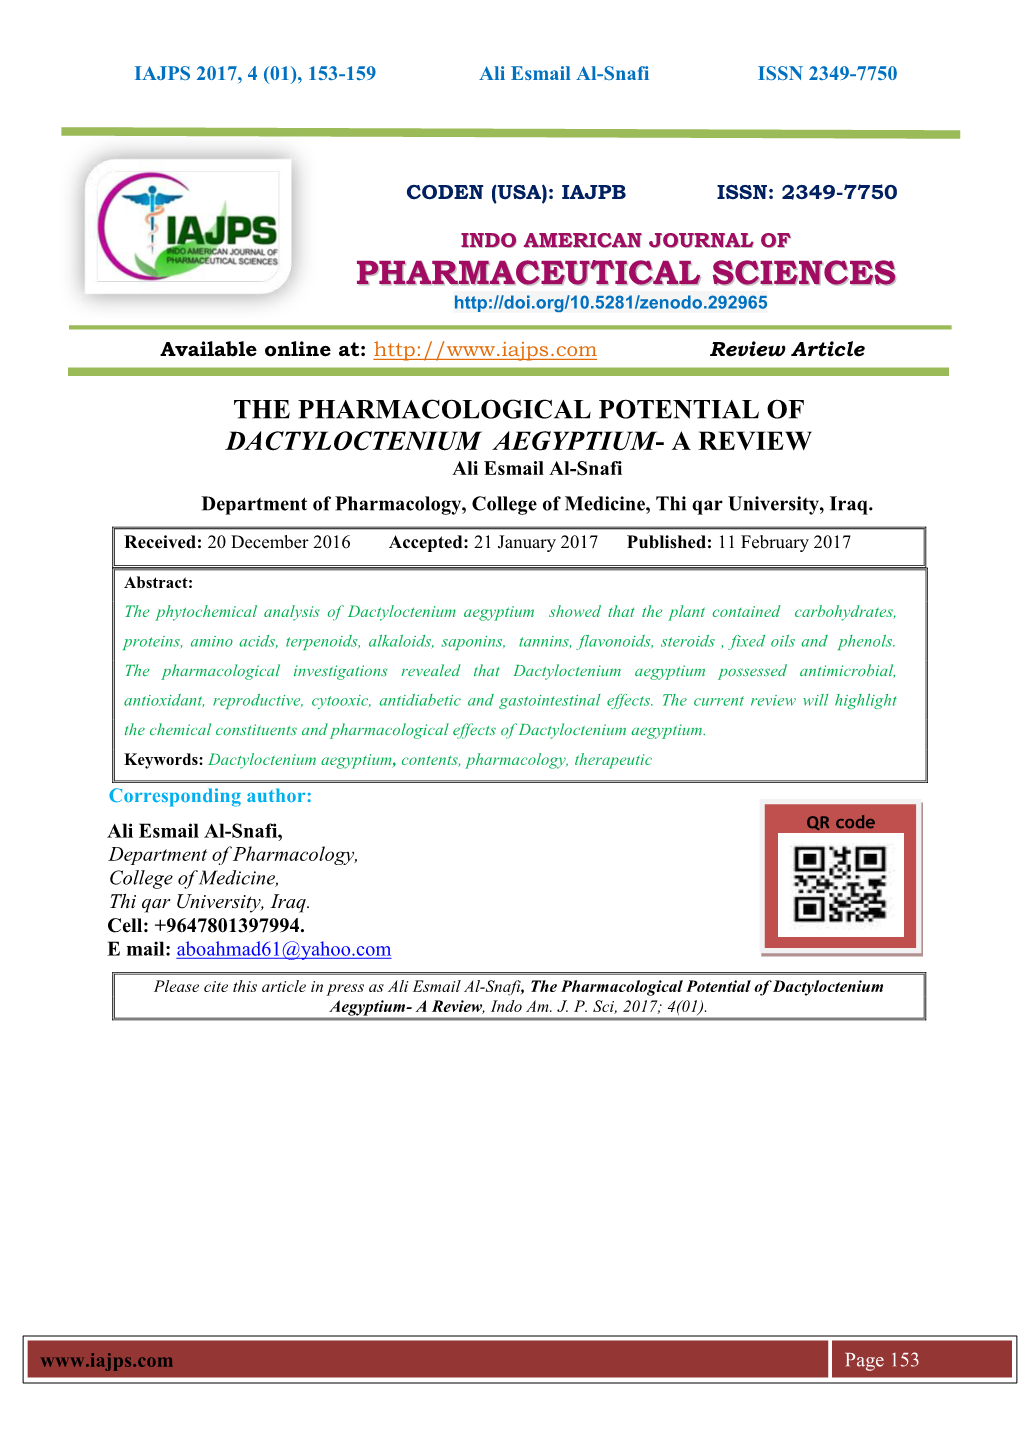 THE PHARMACOLOGICAL POTENTIAL of DACTYLOCTENIUM AEGYPTIUM- a REVIEW Ali Esmail Al-Snafi Department of Pharmacology, College of Medicine, Thi Qar University, Iraq